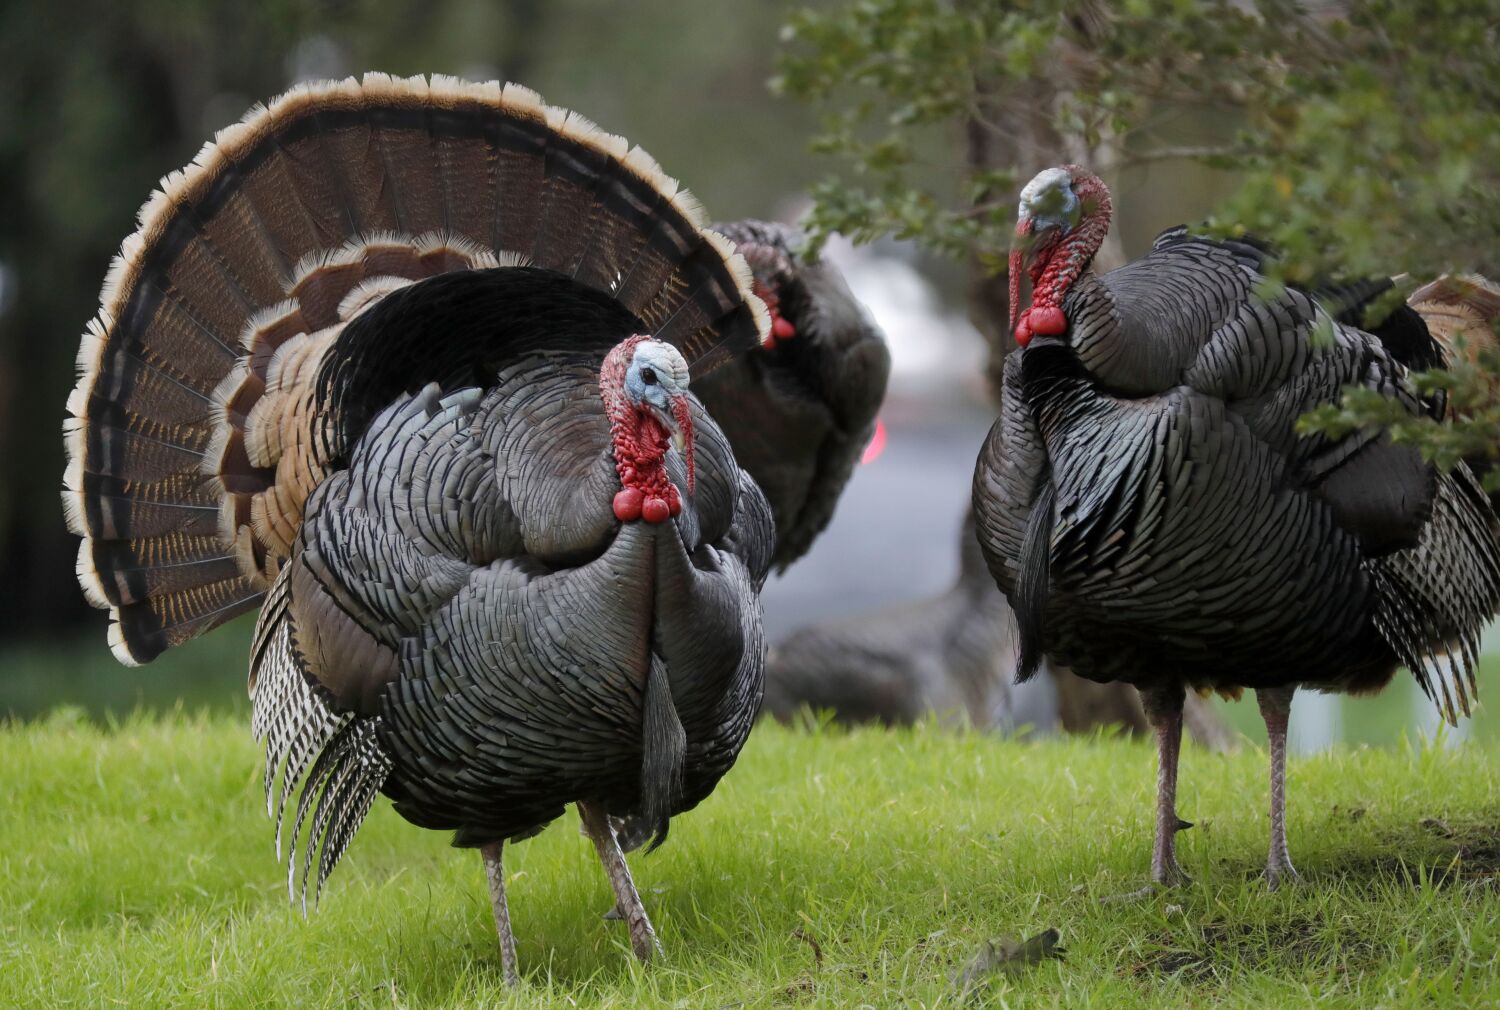 Wildlife officials failed to capture wild turkeys before attack on Sacramento delivery driver